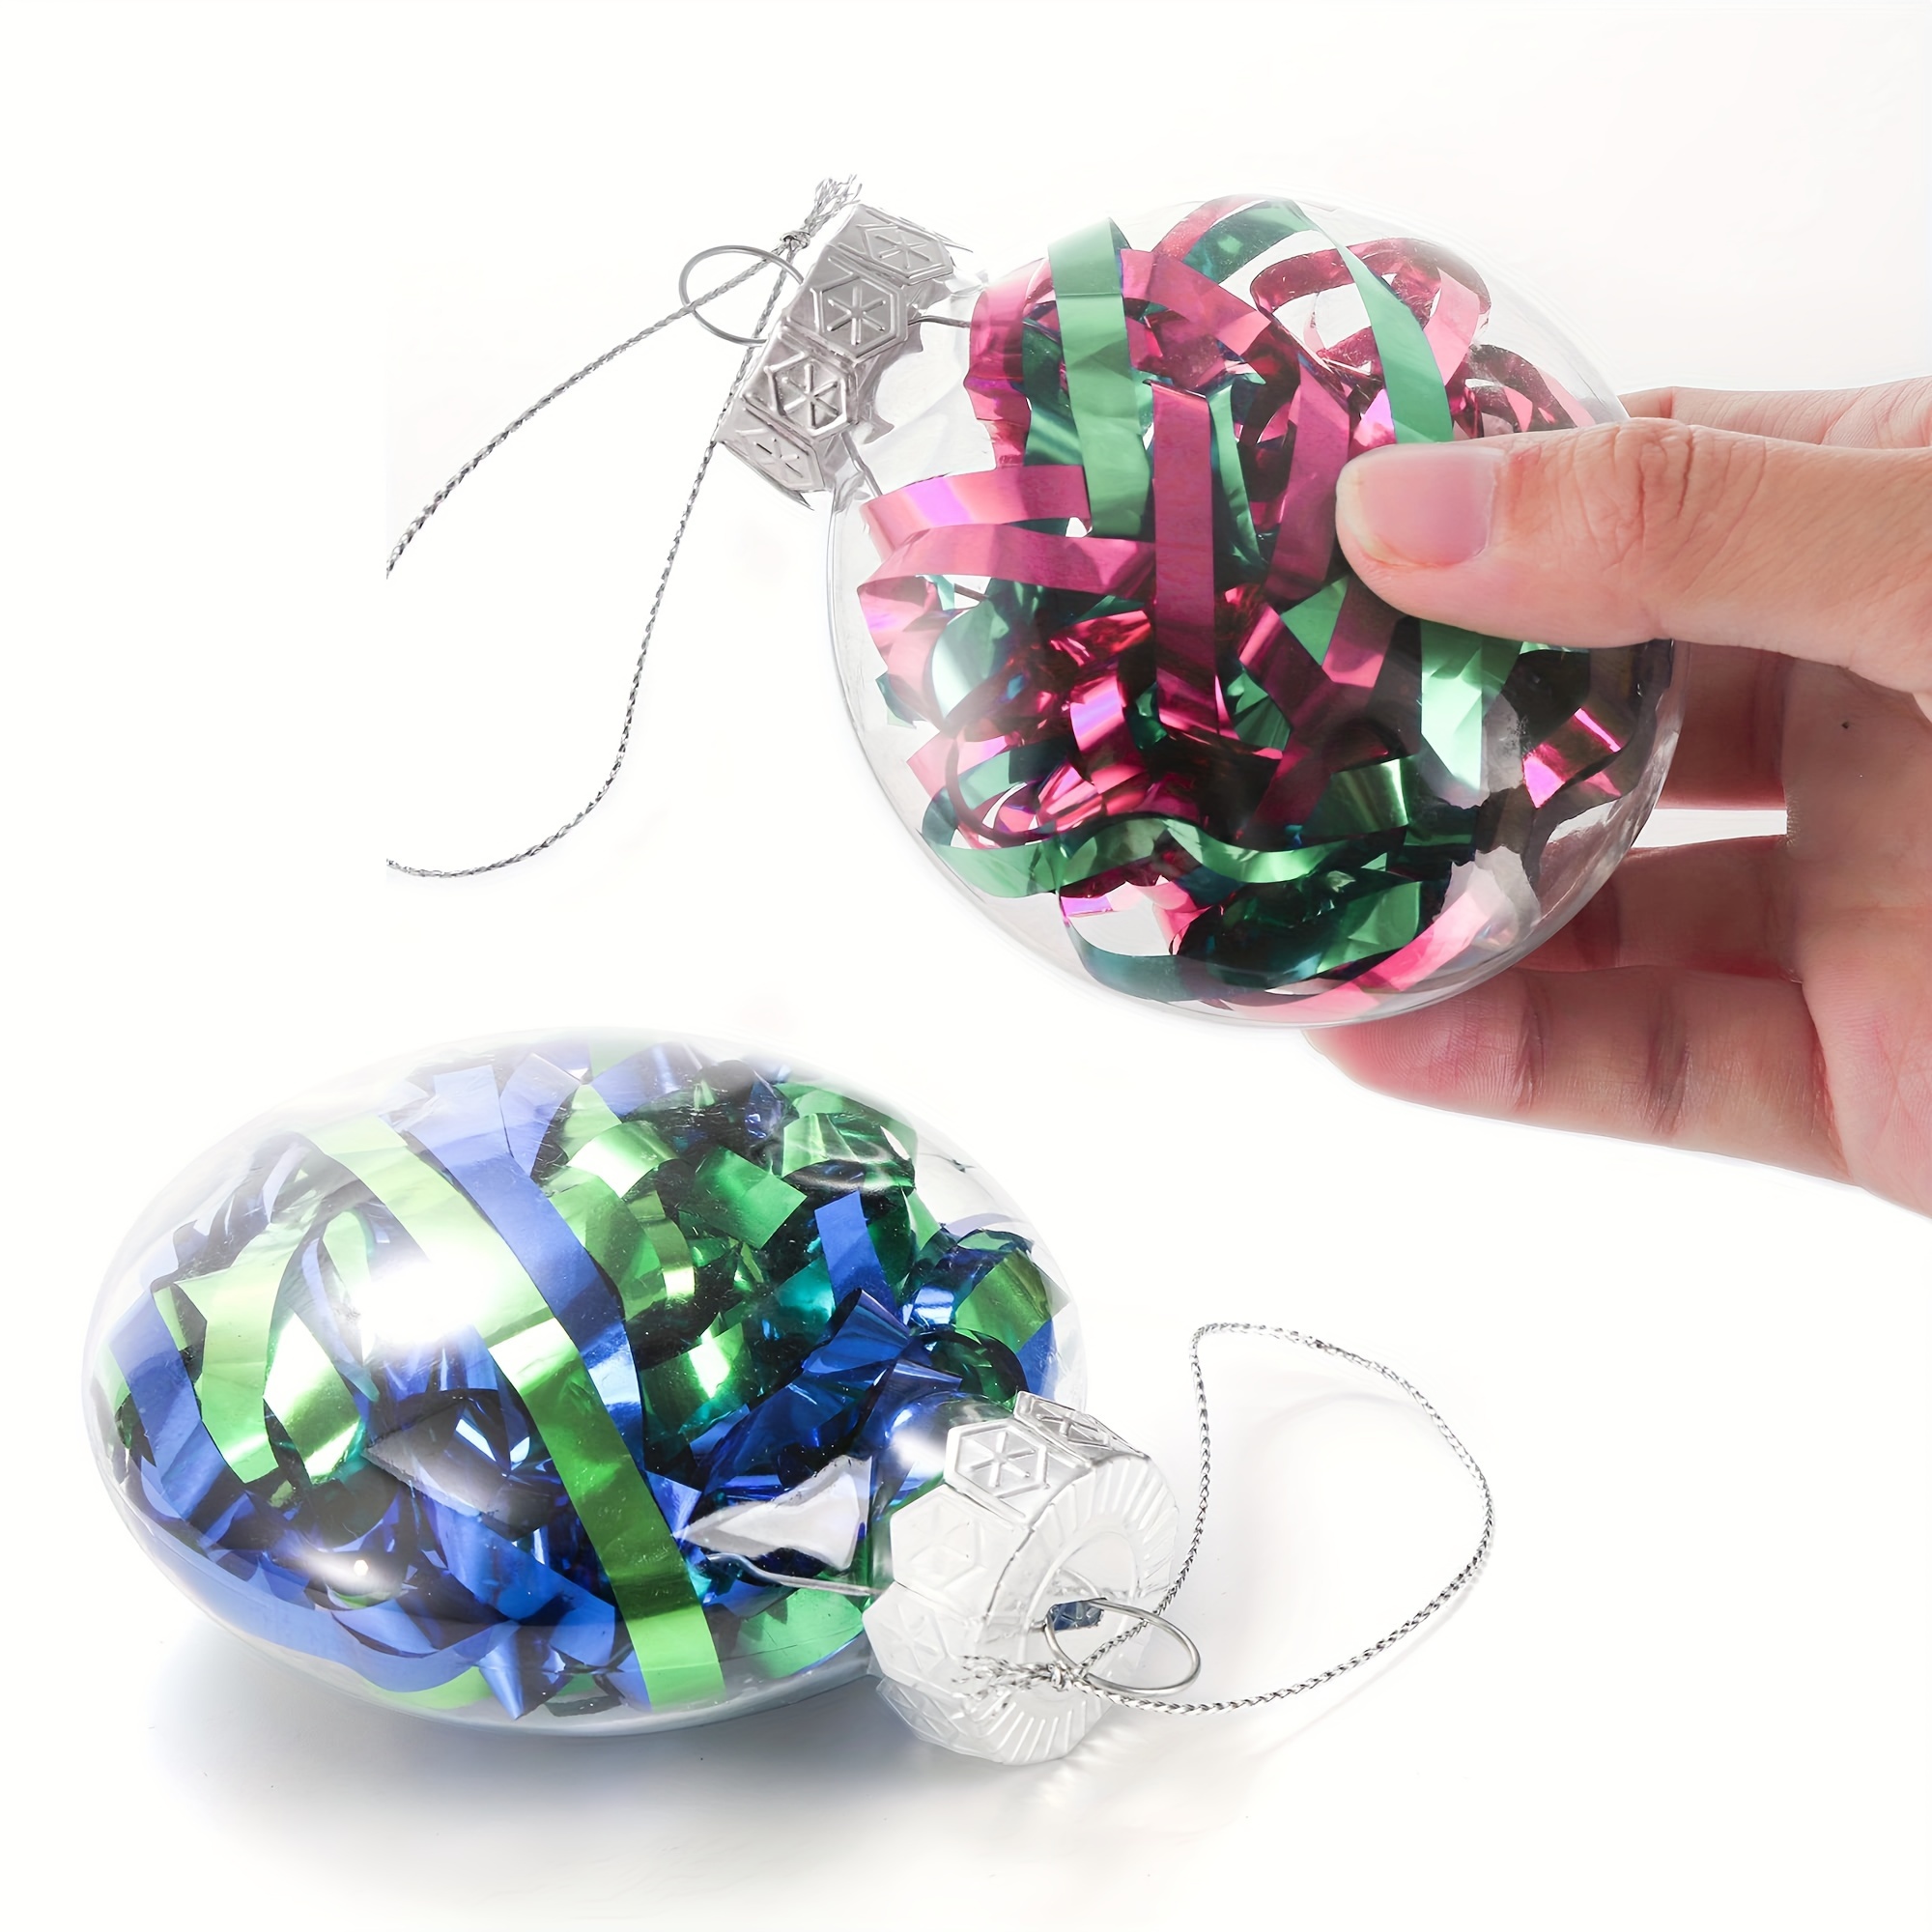  Clear Plastic Ball Fillable Ornament Favor 3 80mm: Home Decor  Products: Home & Kitchen